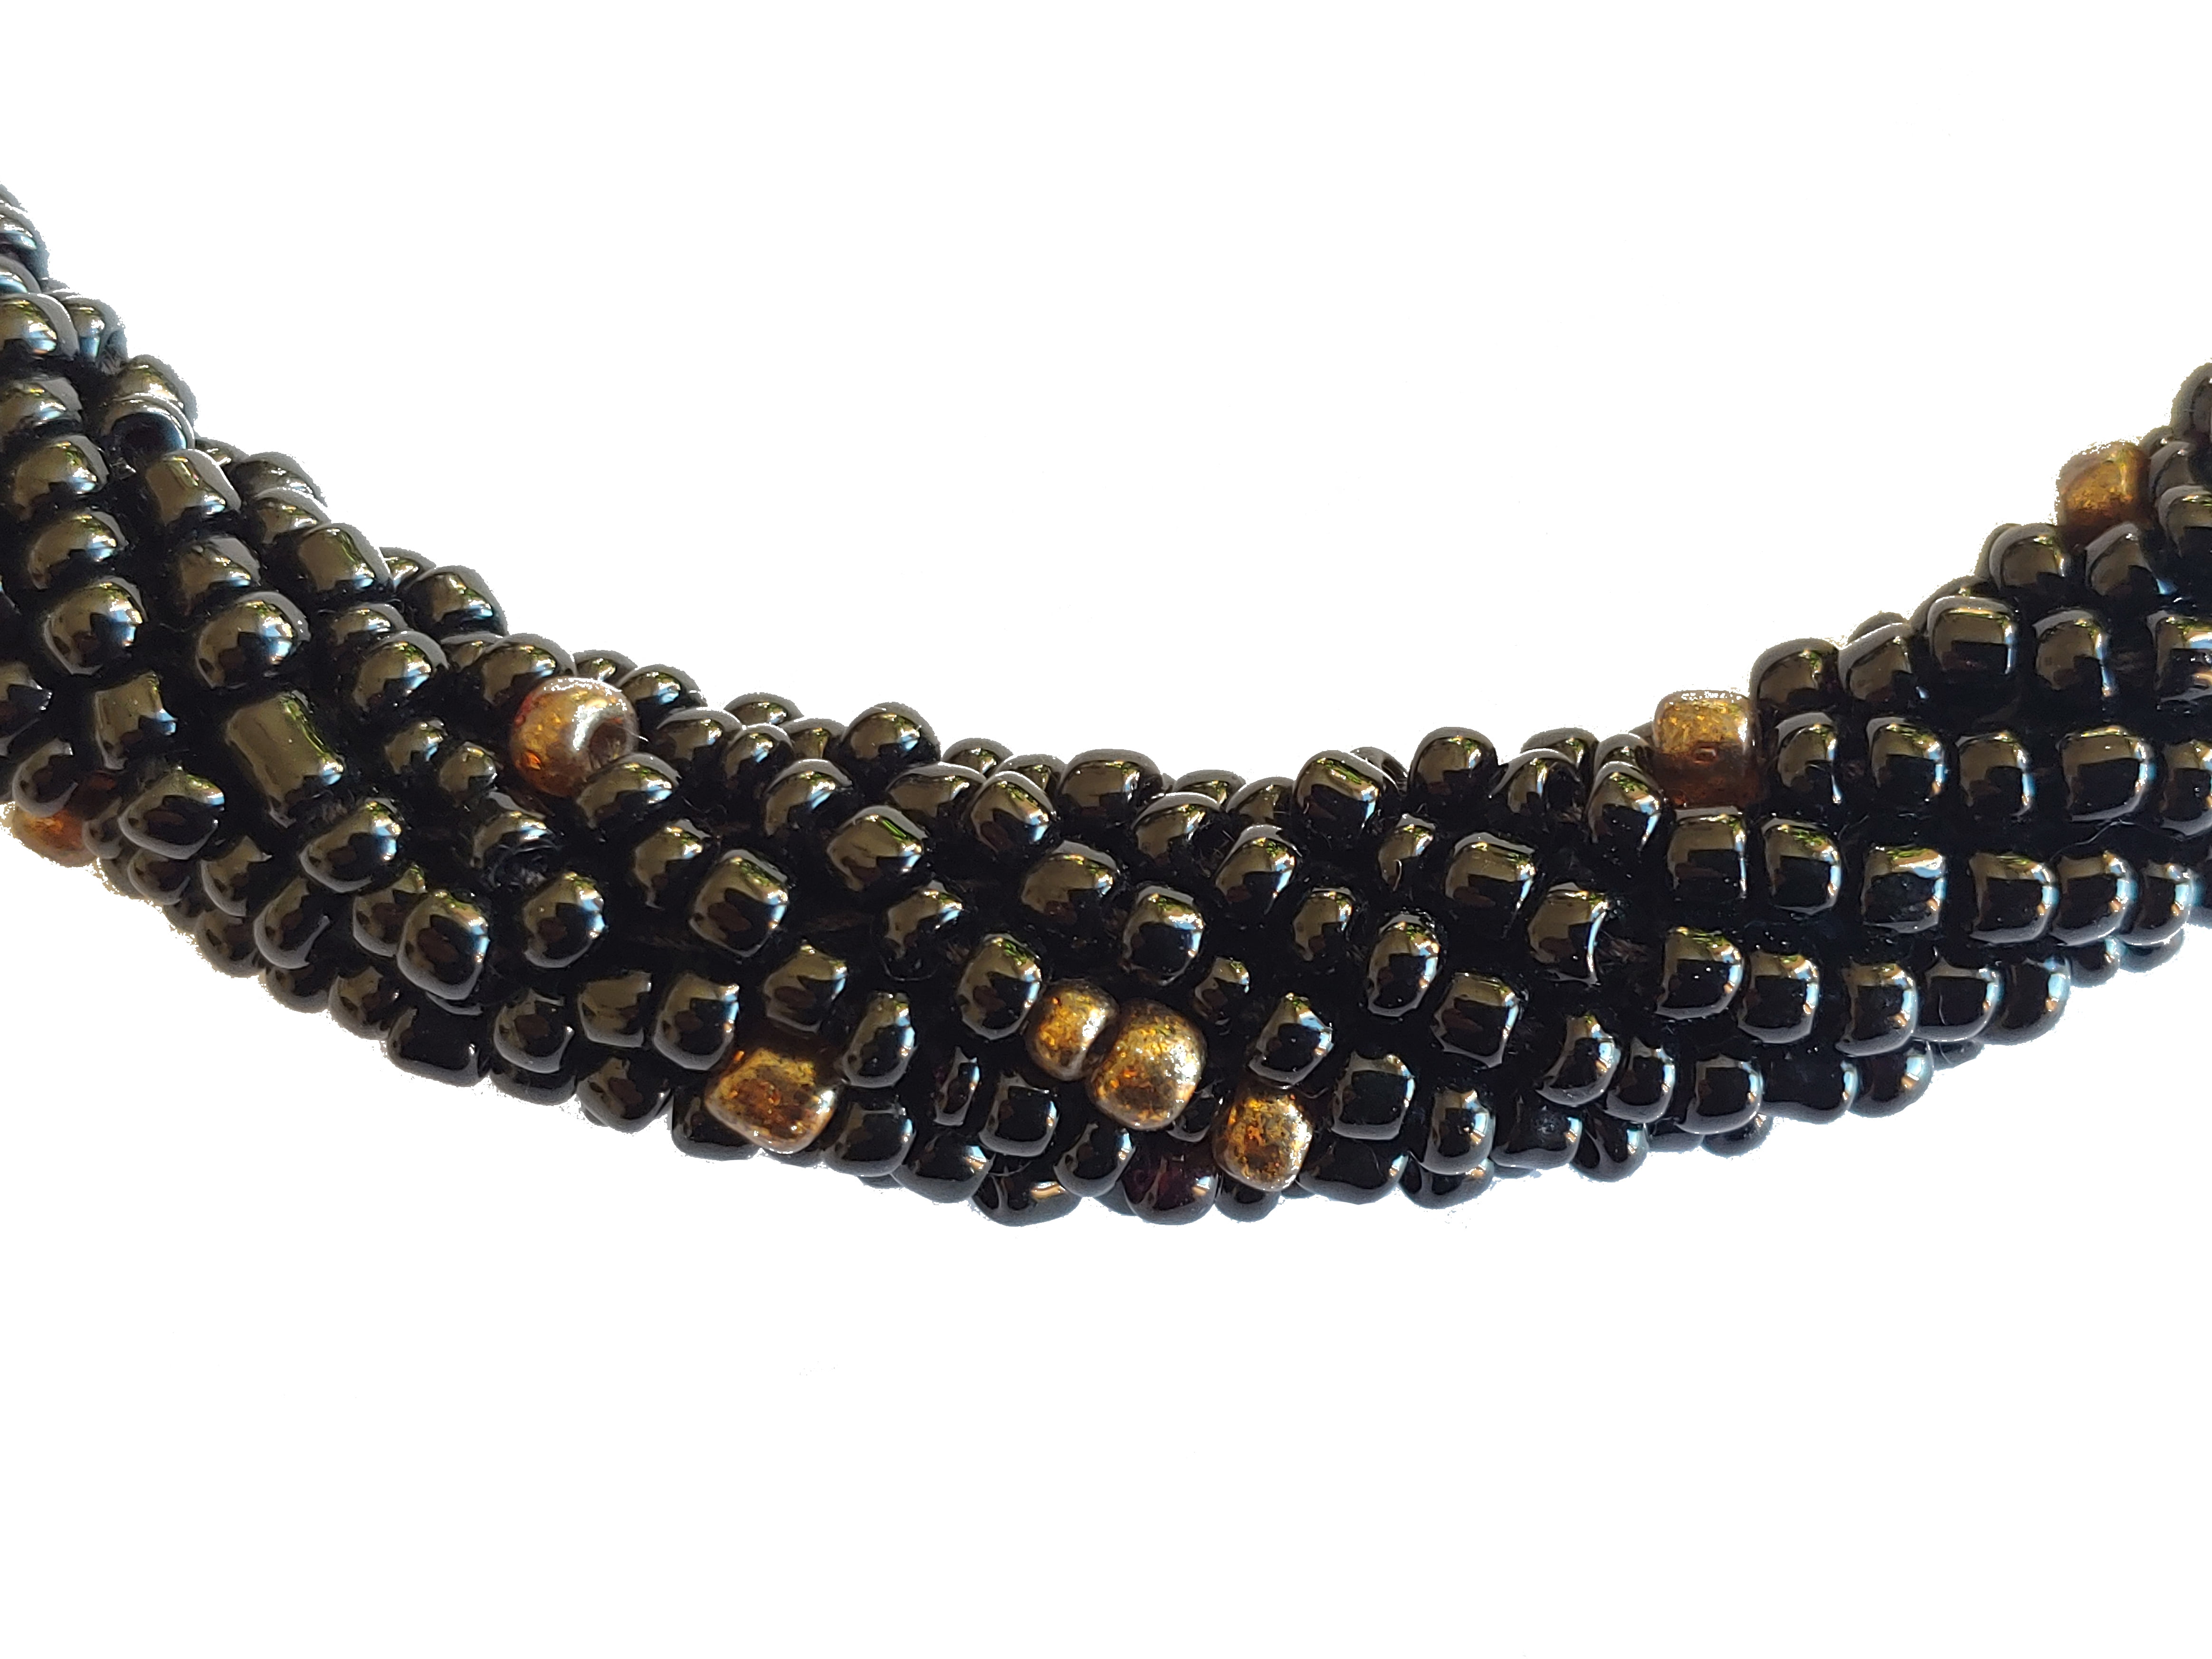 Black Stone African Bead Necklace With Earrings at Best Price in Mumbai |  Kyria